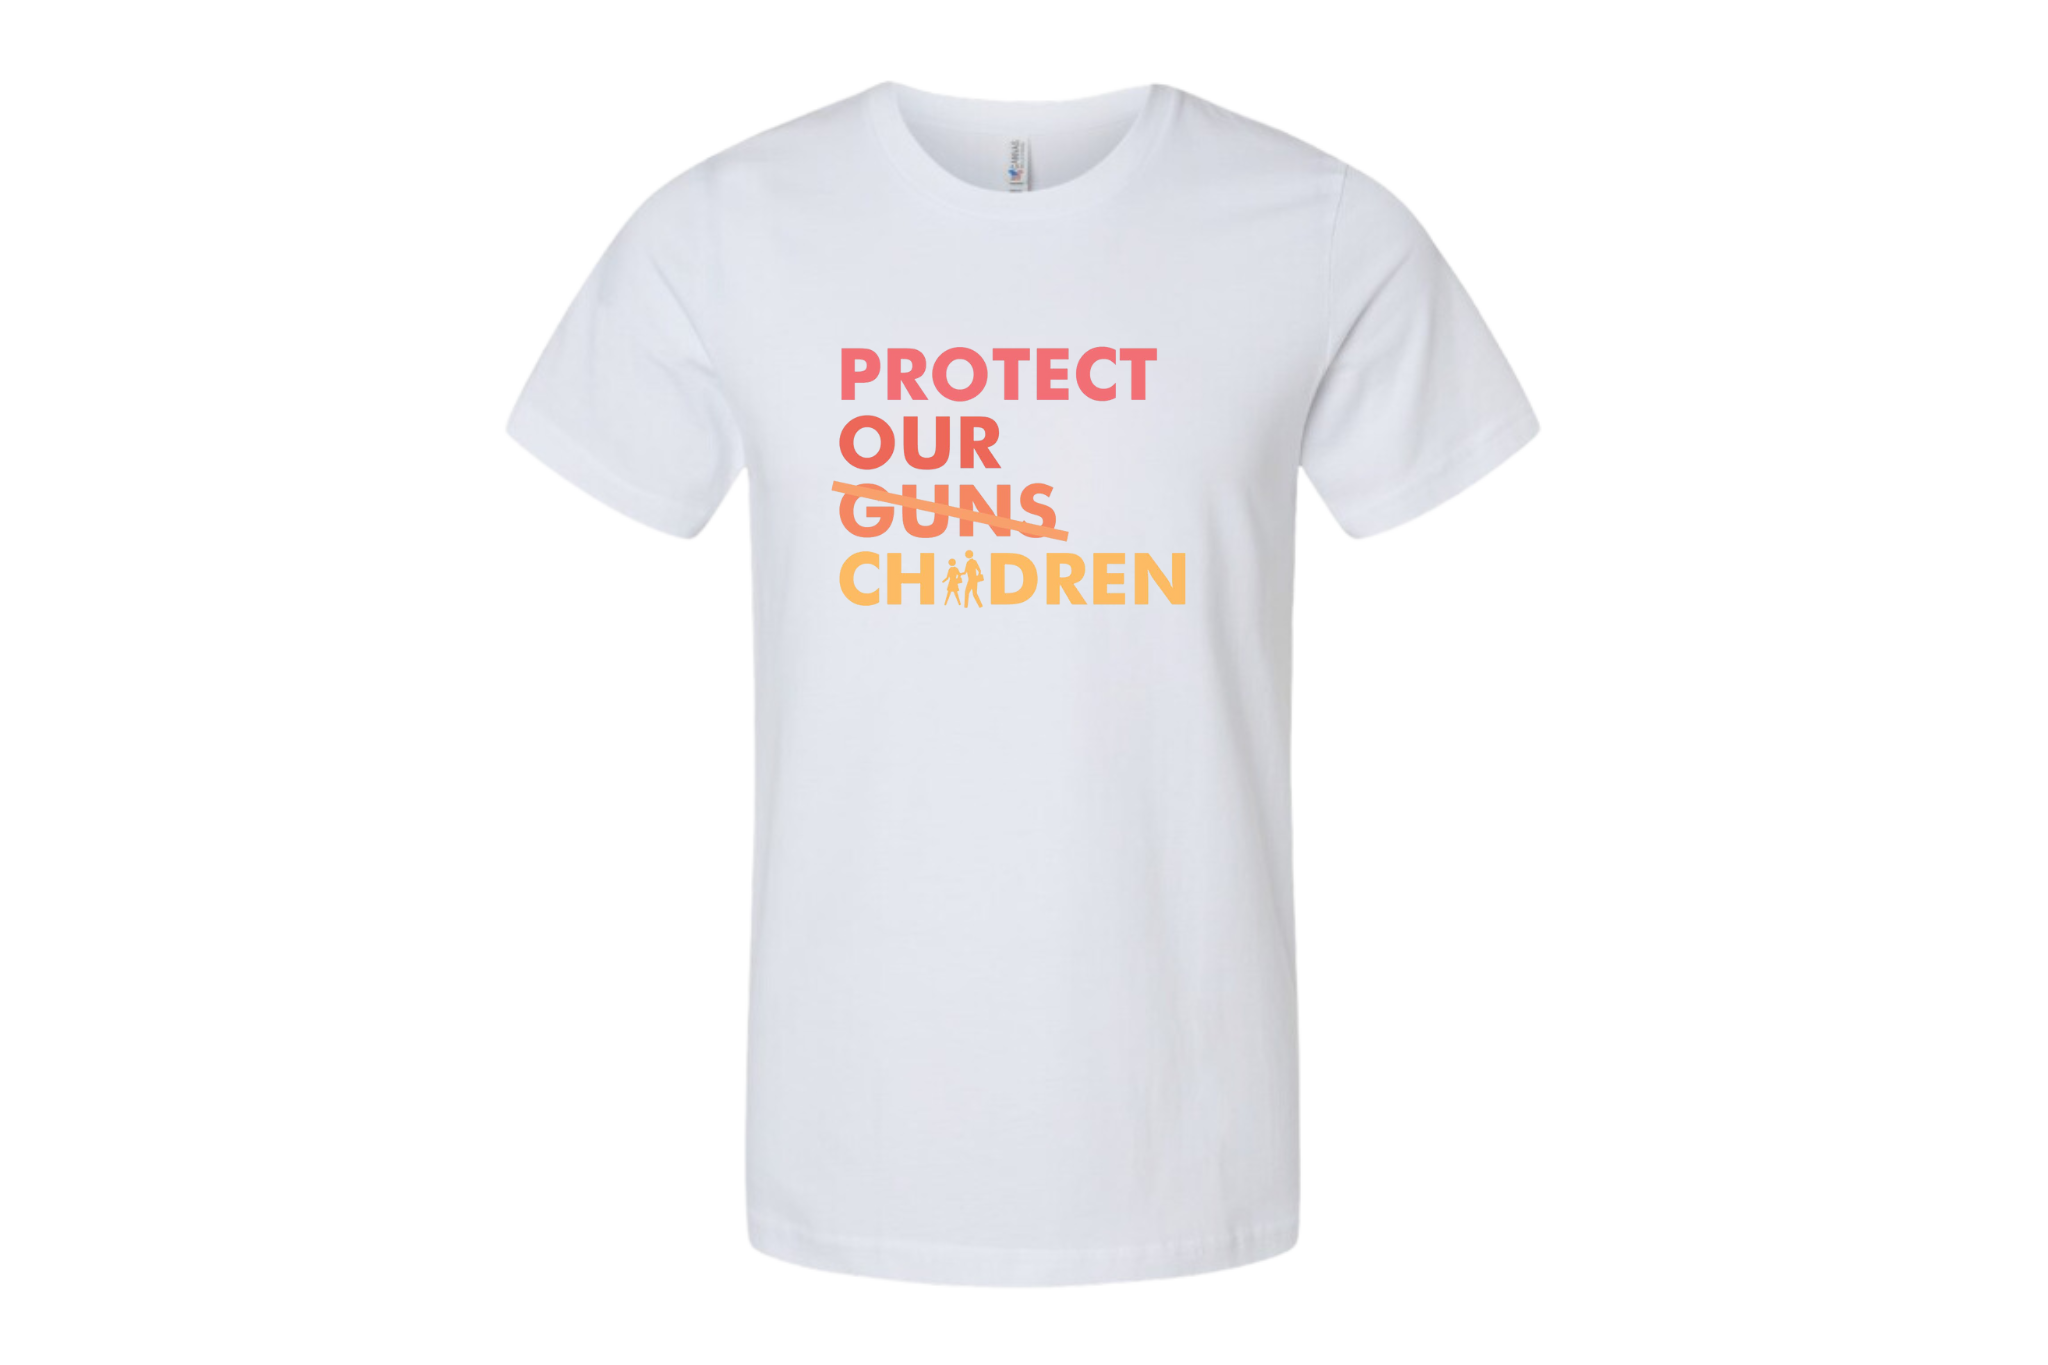 Protect Our Children Tee